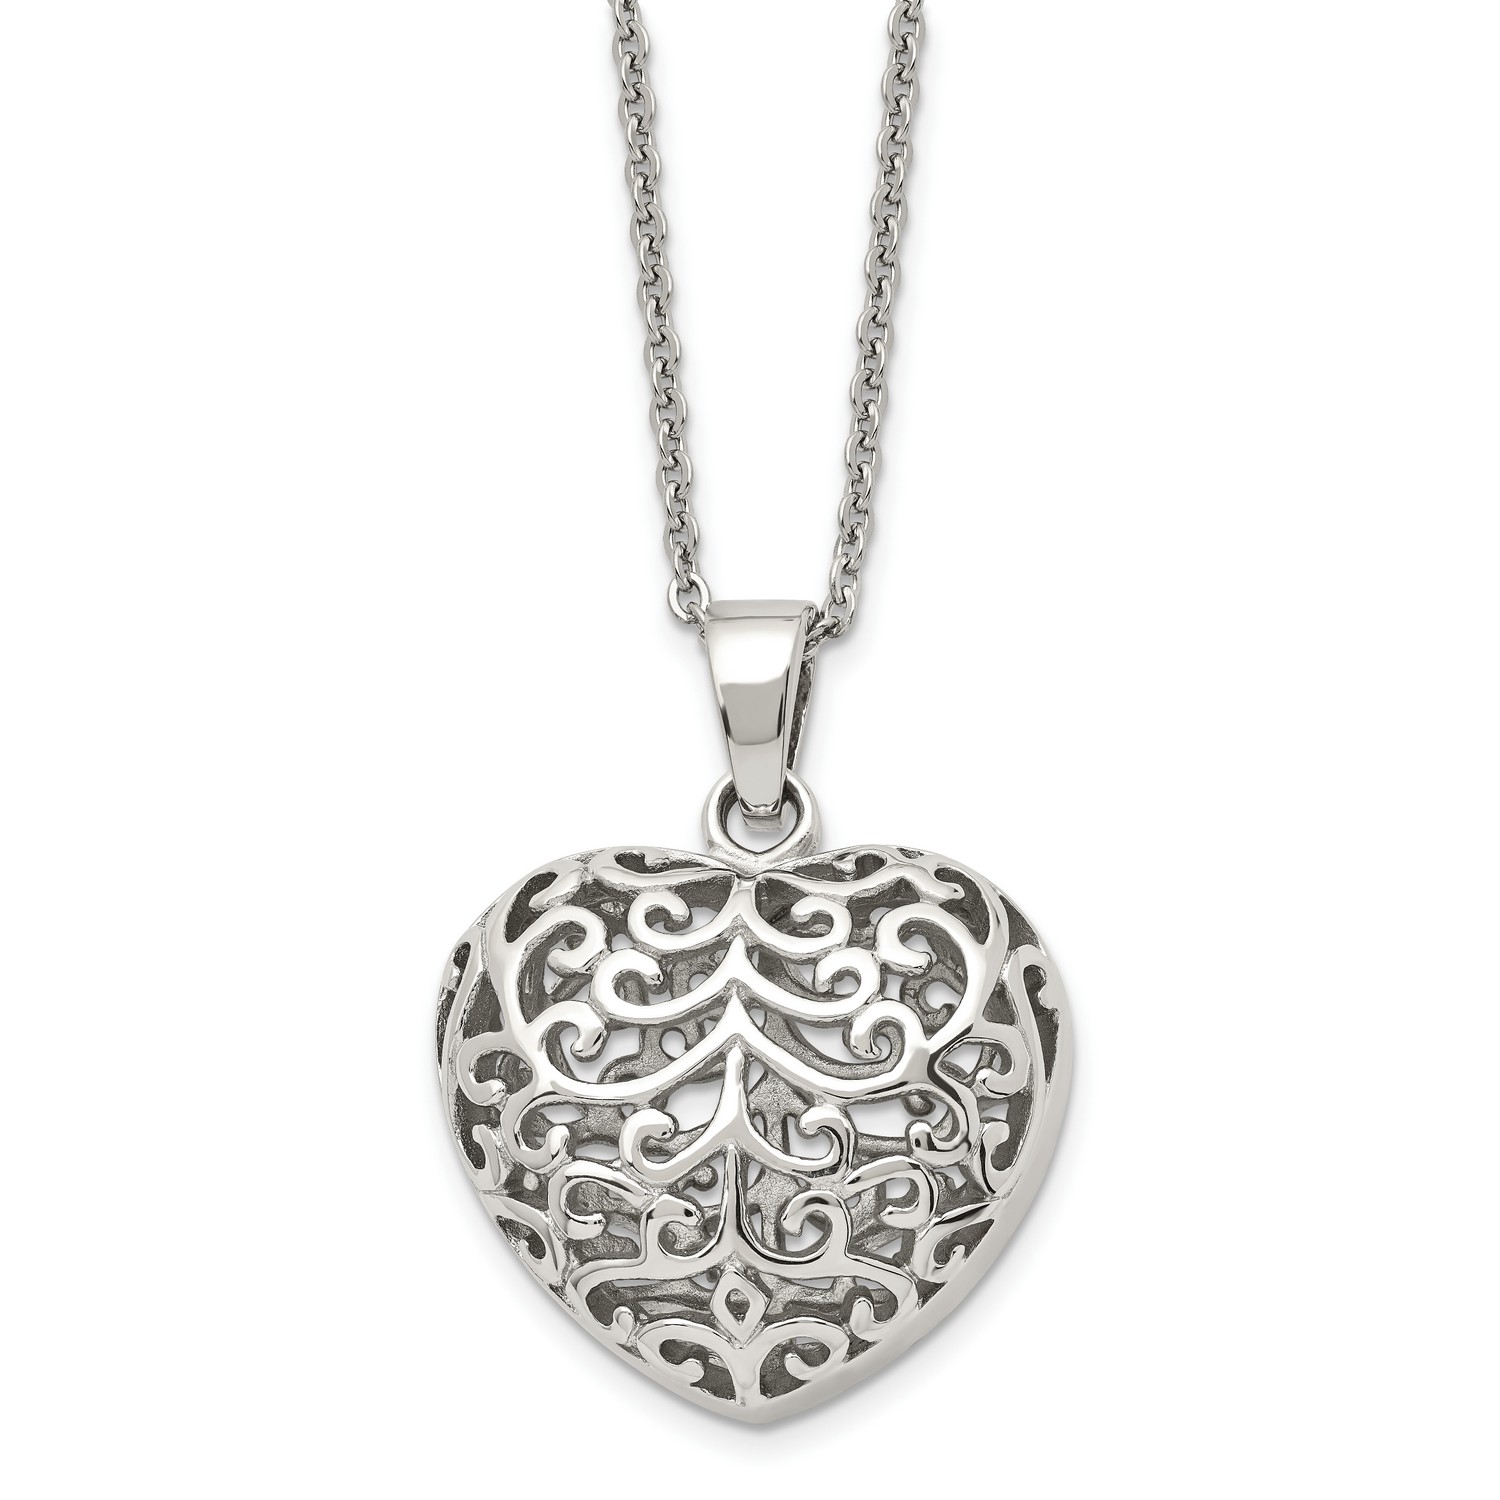 Stainless Steel Filigree Puffed Heart Pendant Necklace 40 mm x 32 mm 22 ...